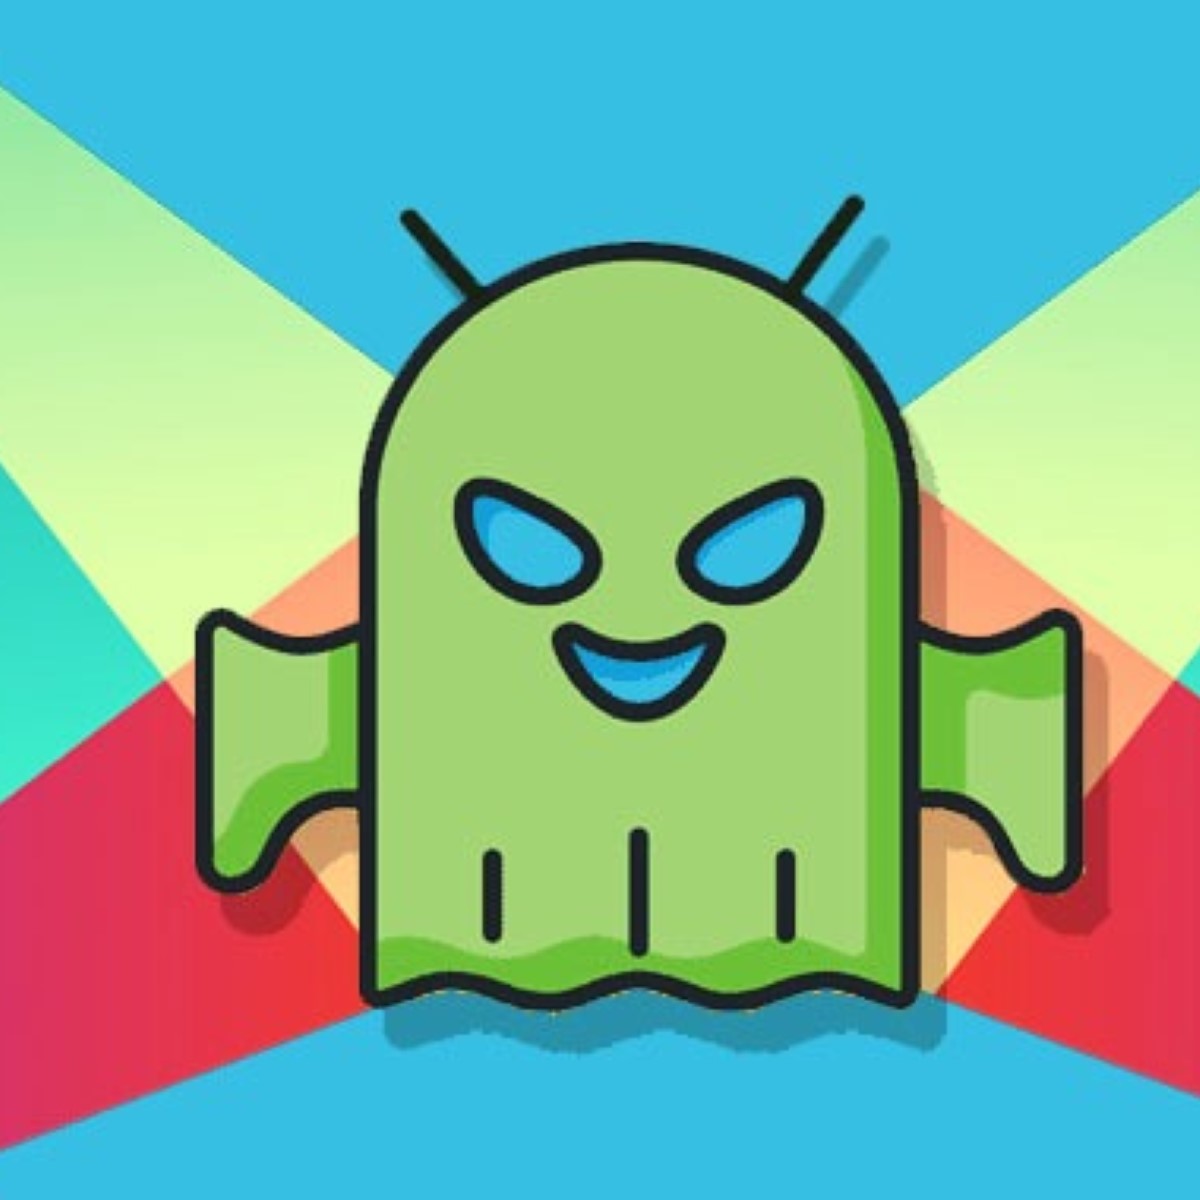 Malicious APPS on Google Play deliver banking malware to victims